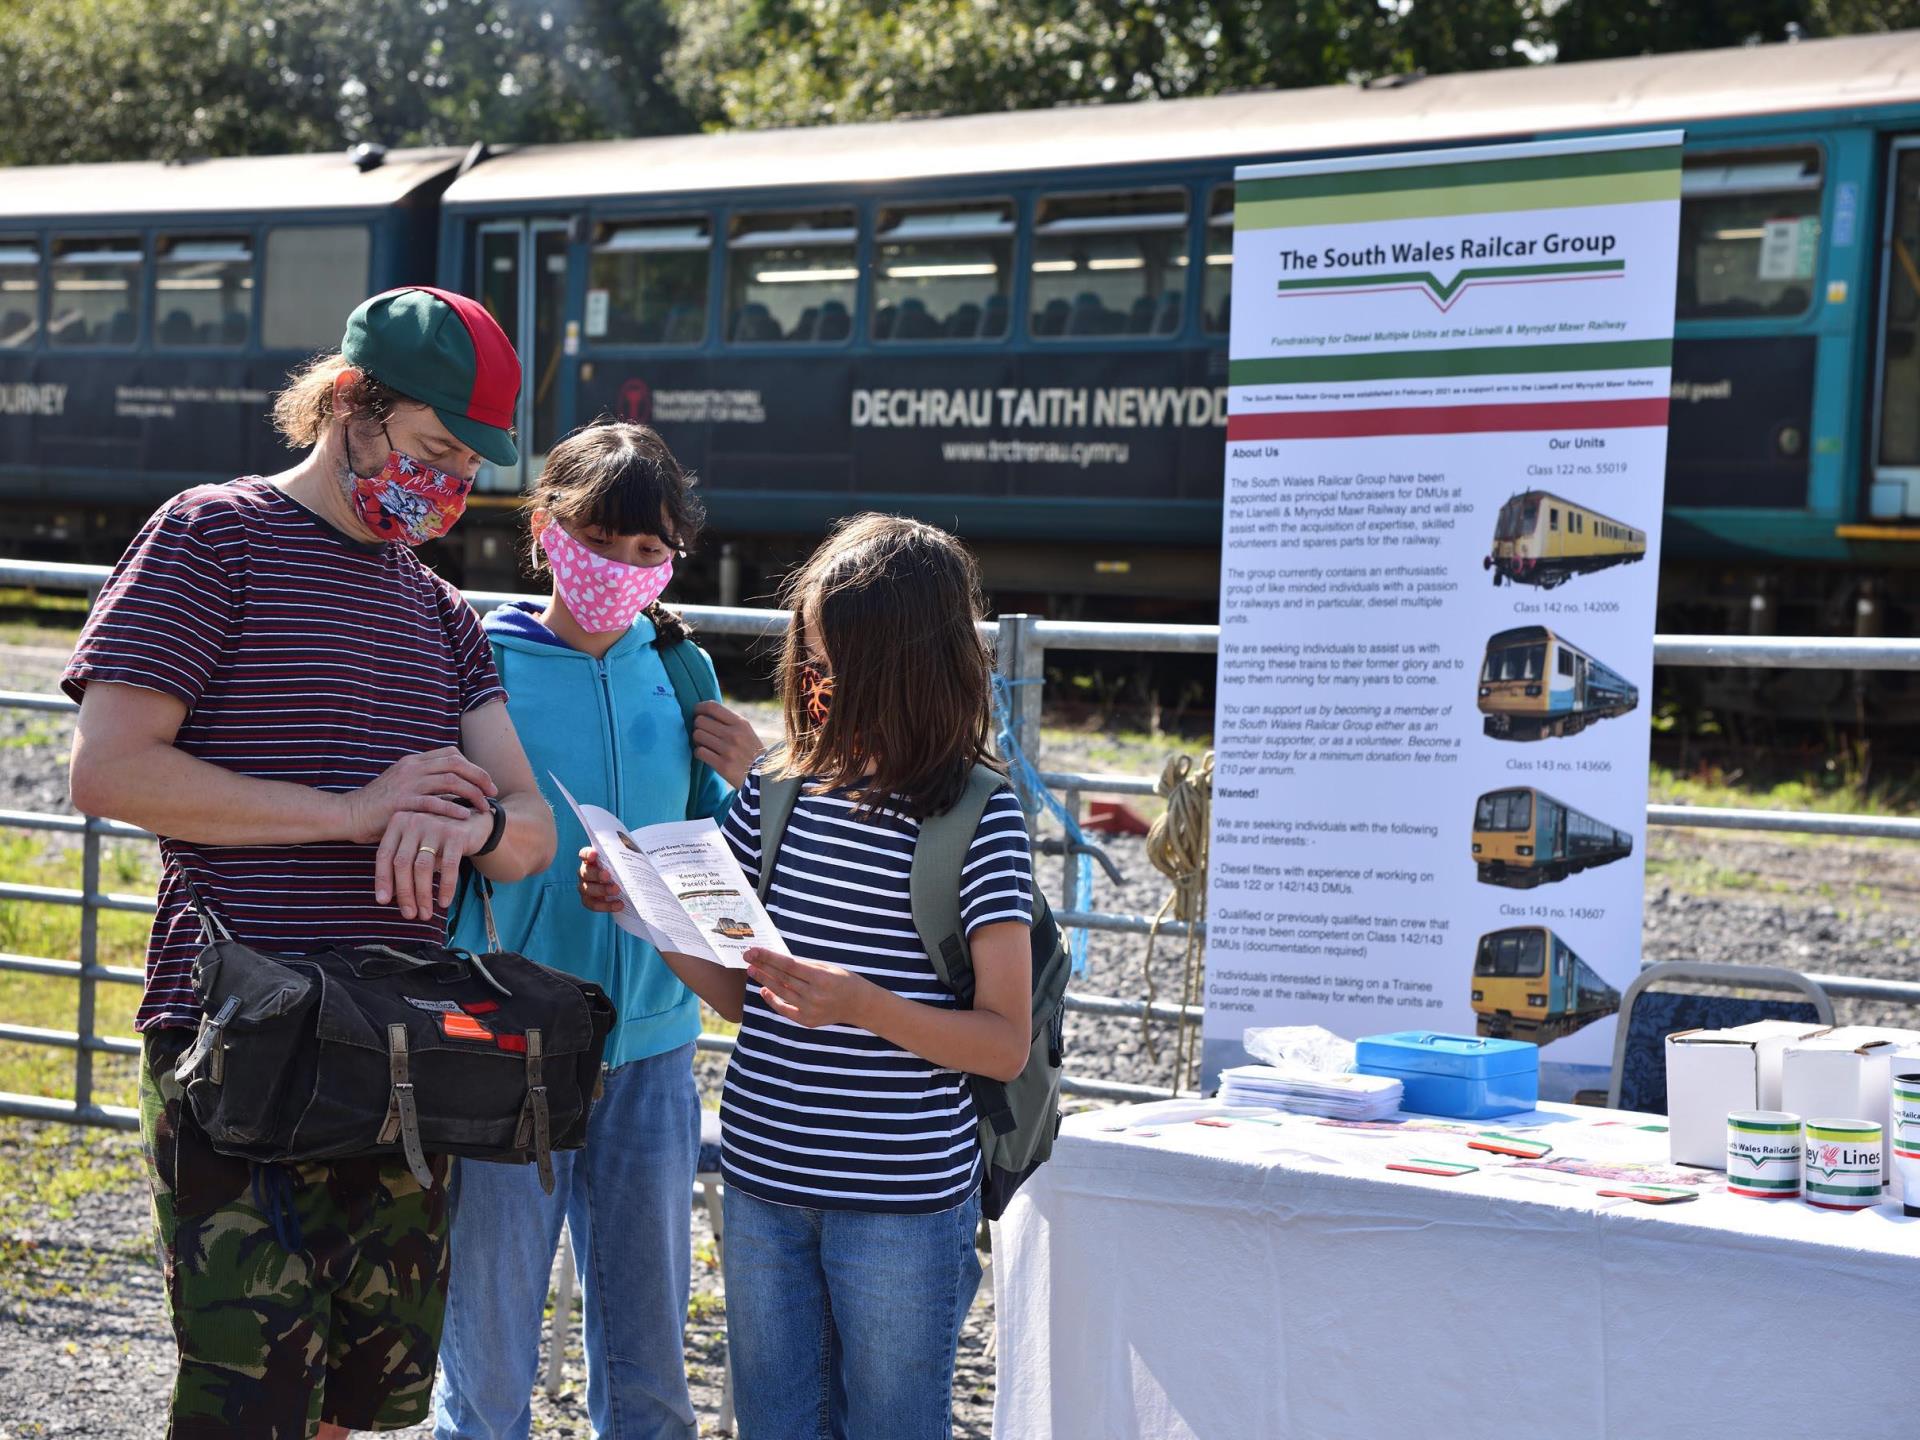 Visitors check the timetable at an event